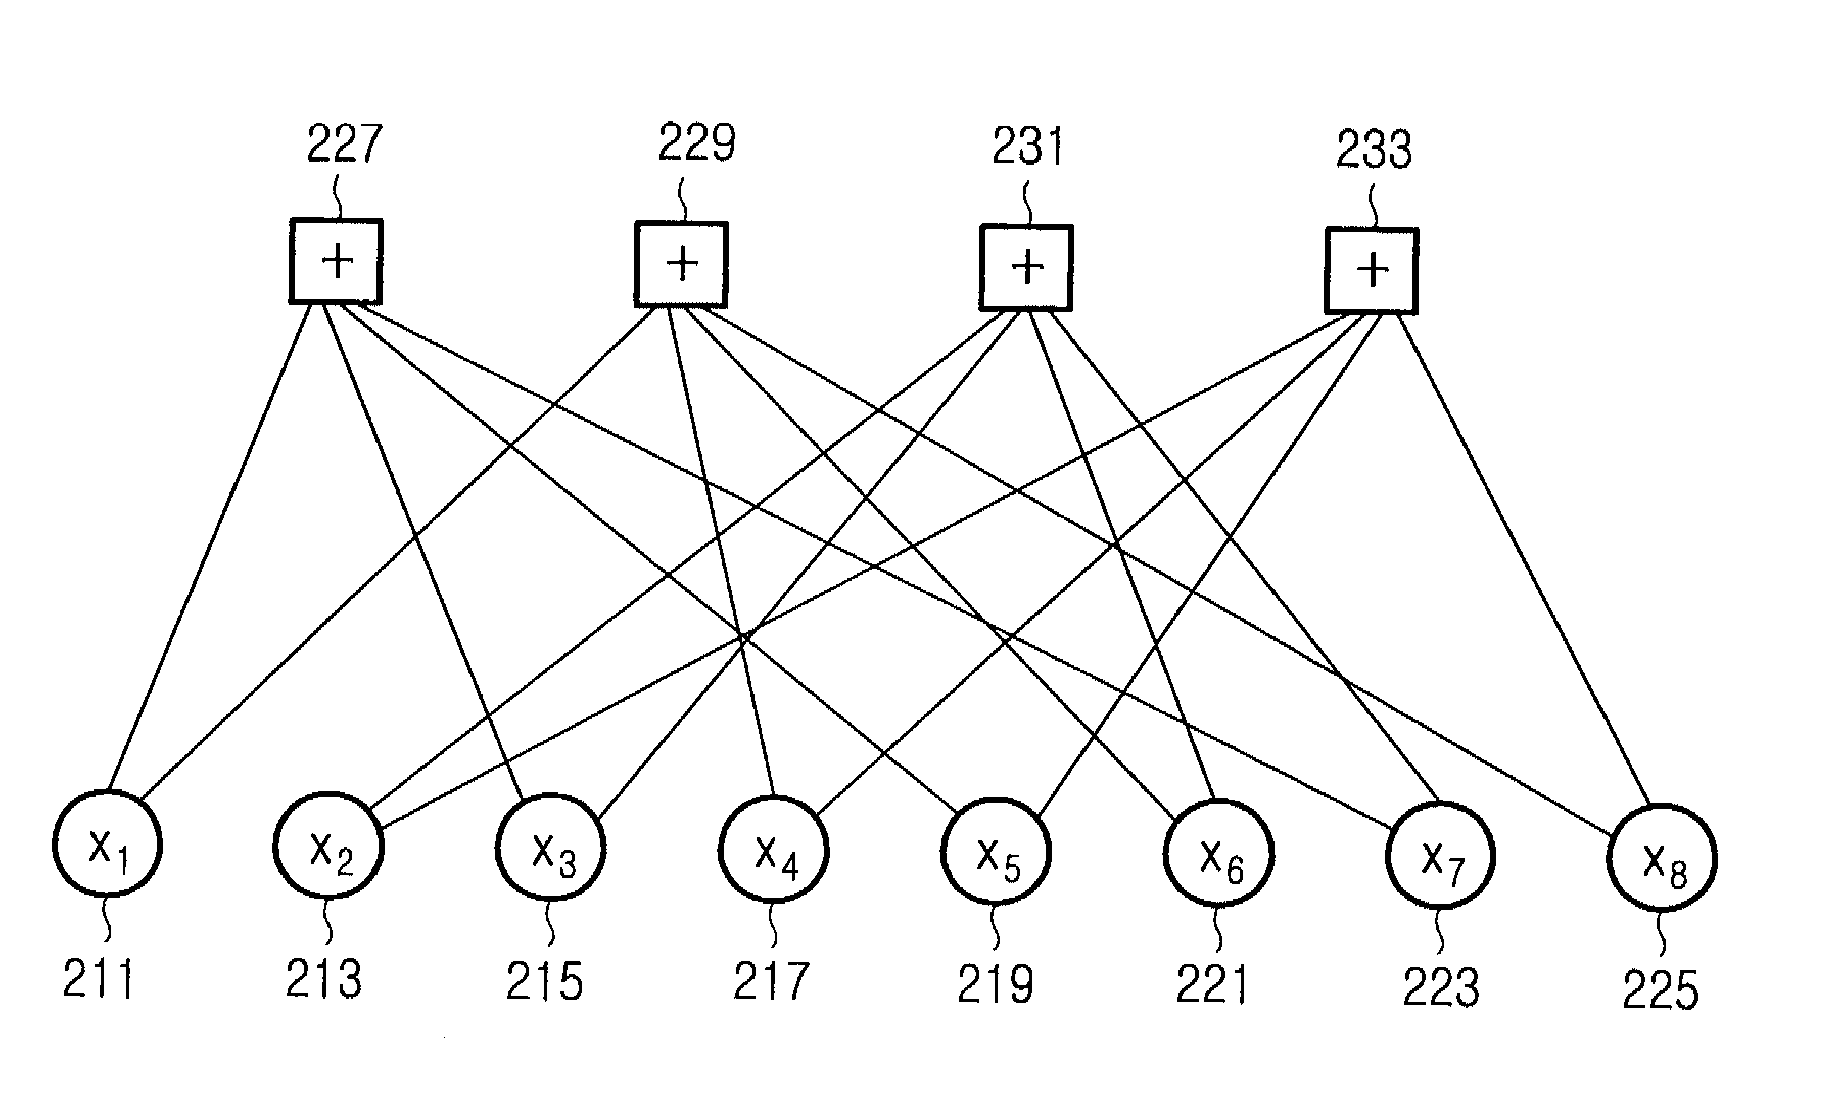 Apparatus and method for transmitting/receiving signal in a communication system